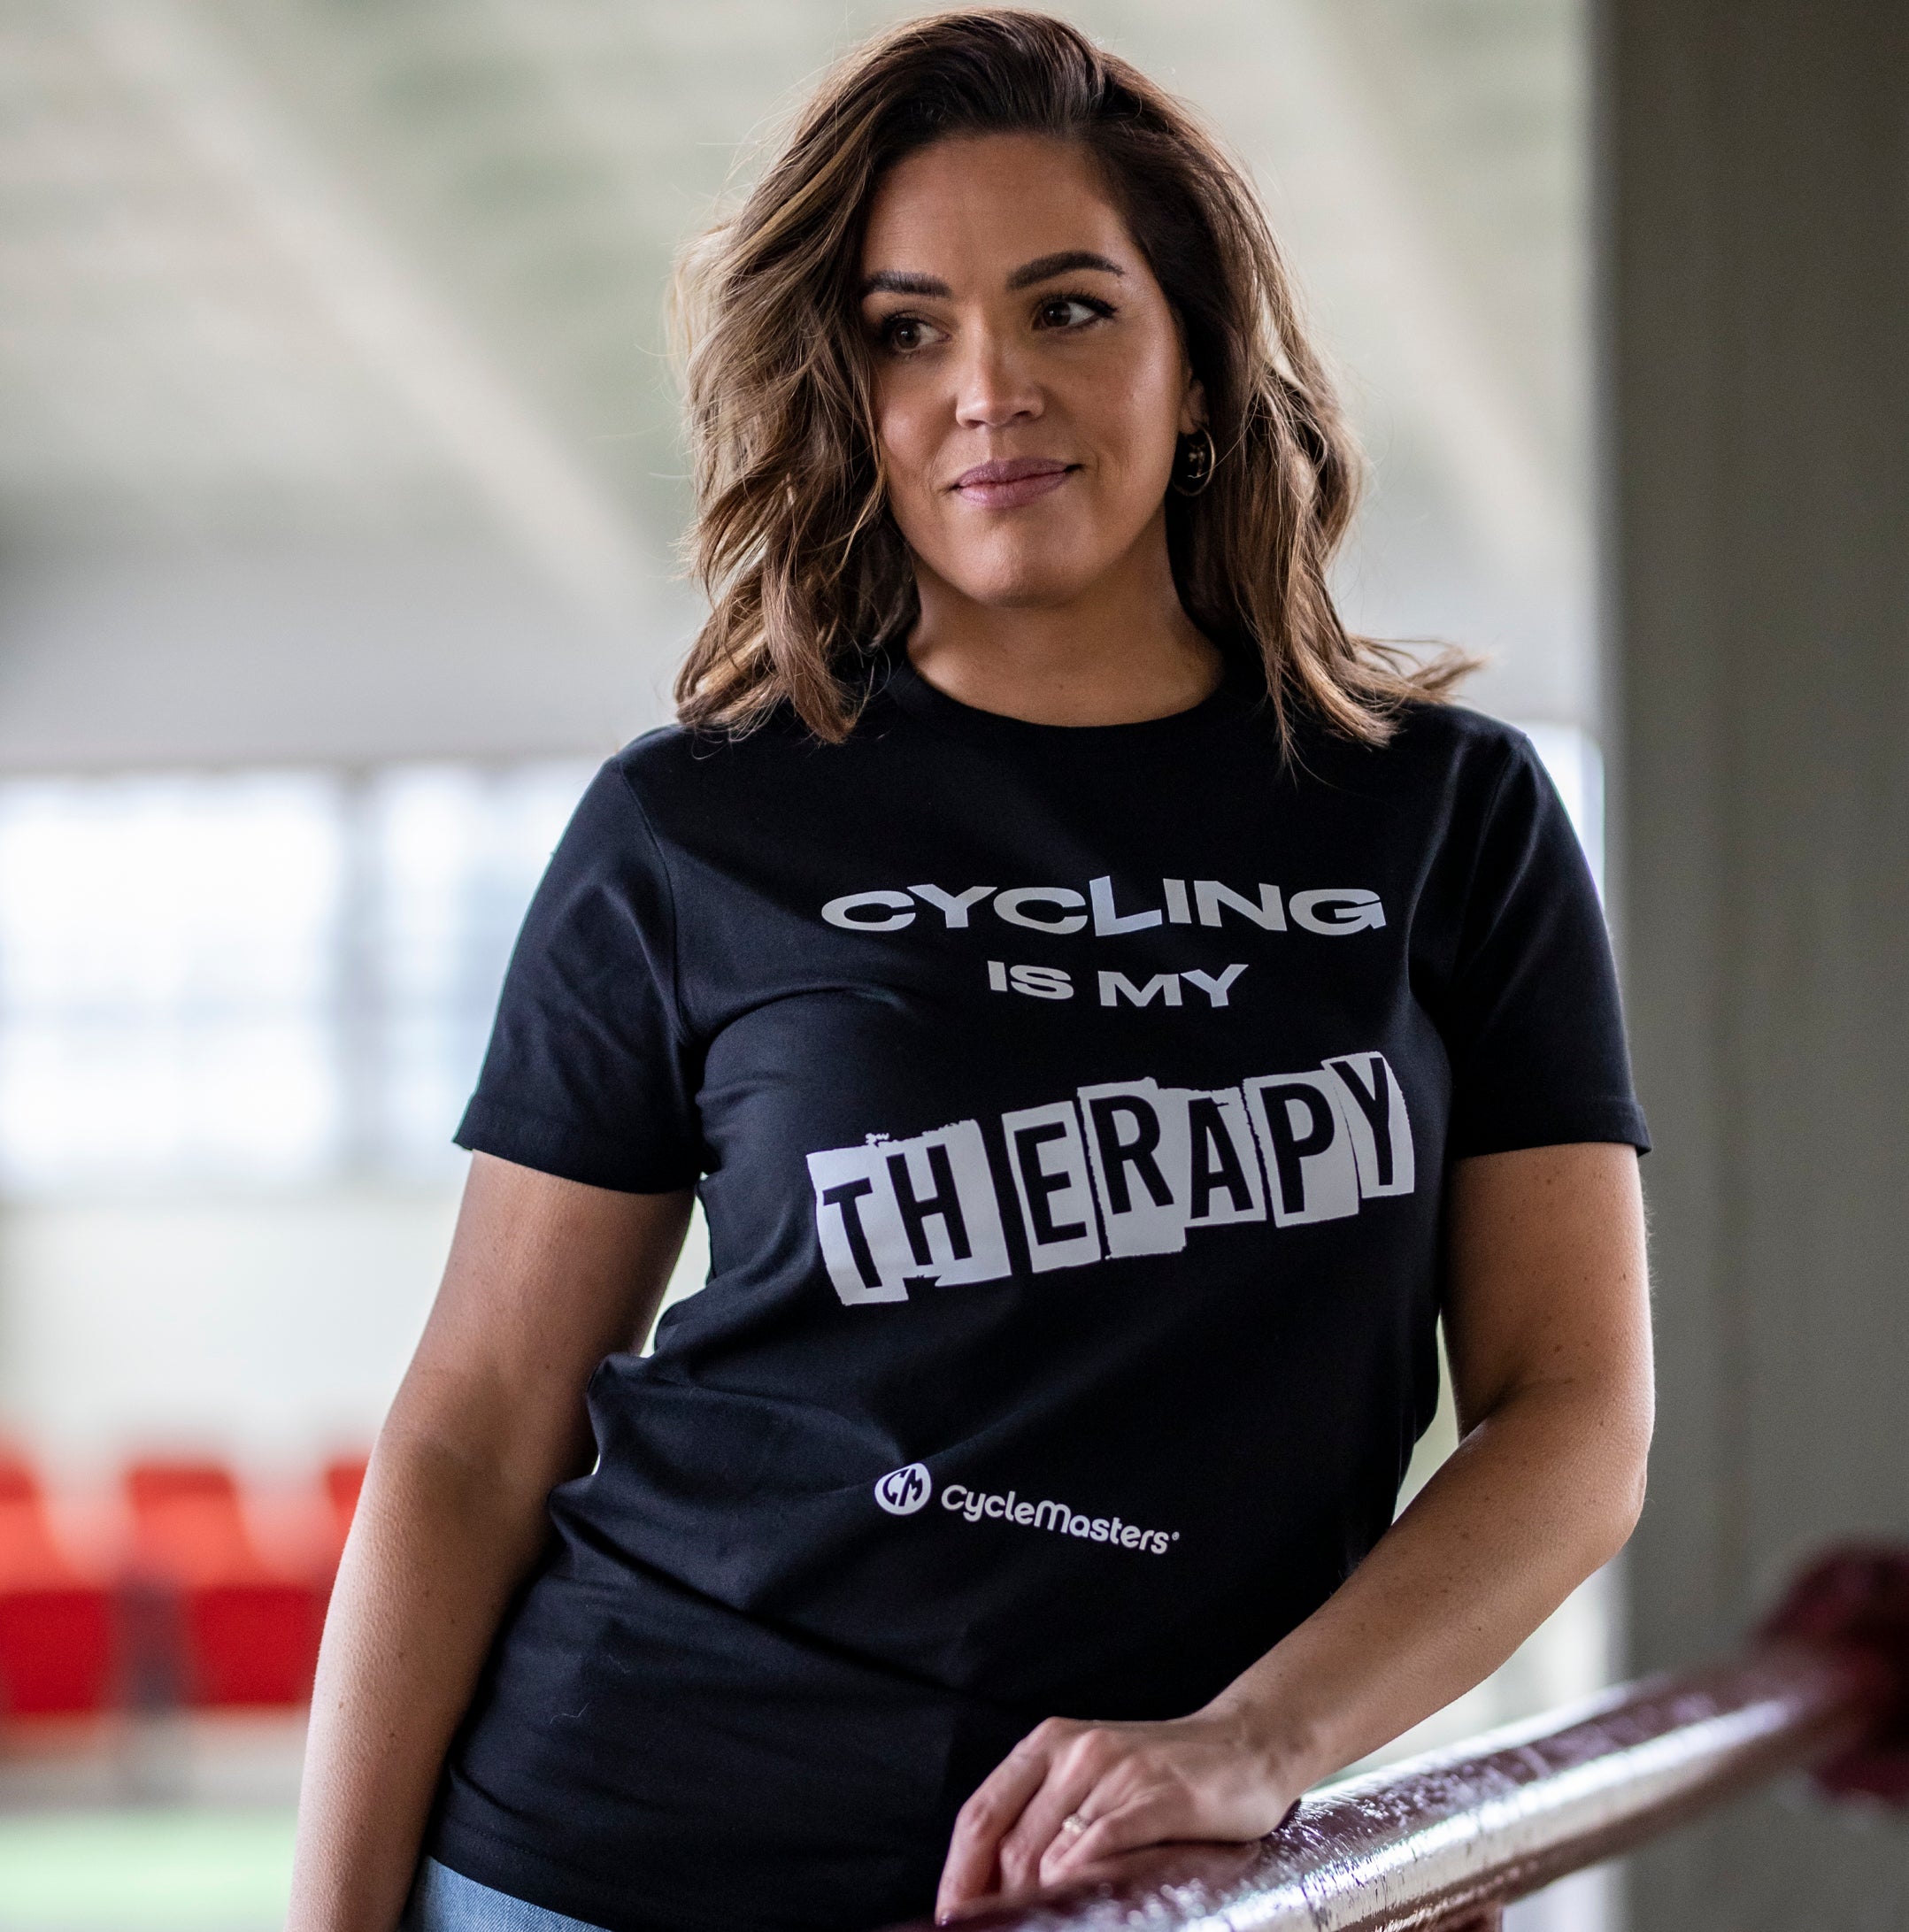 A woman wears a black CycleMasters t-shirt 